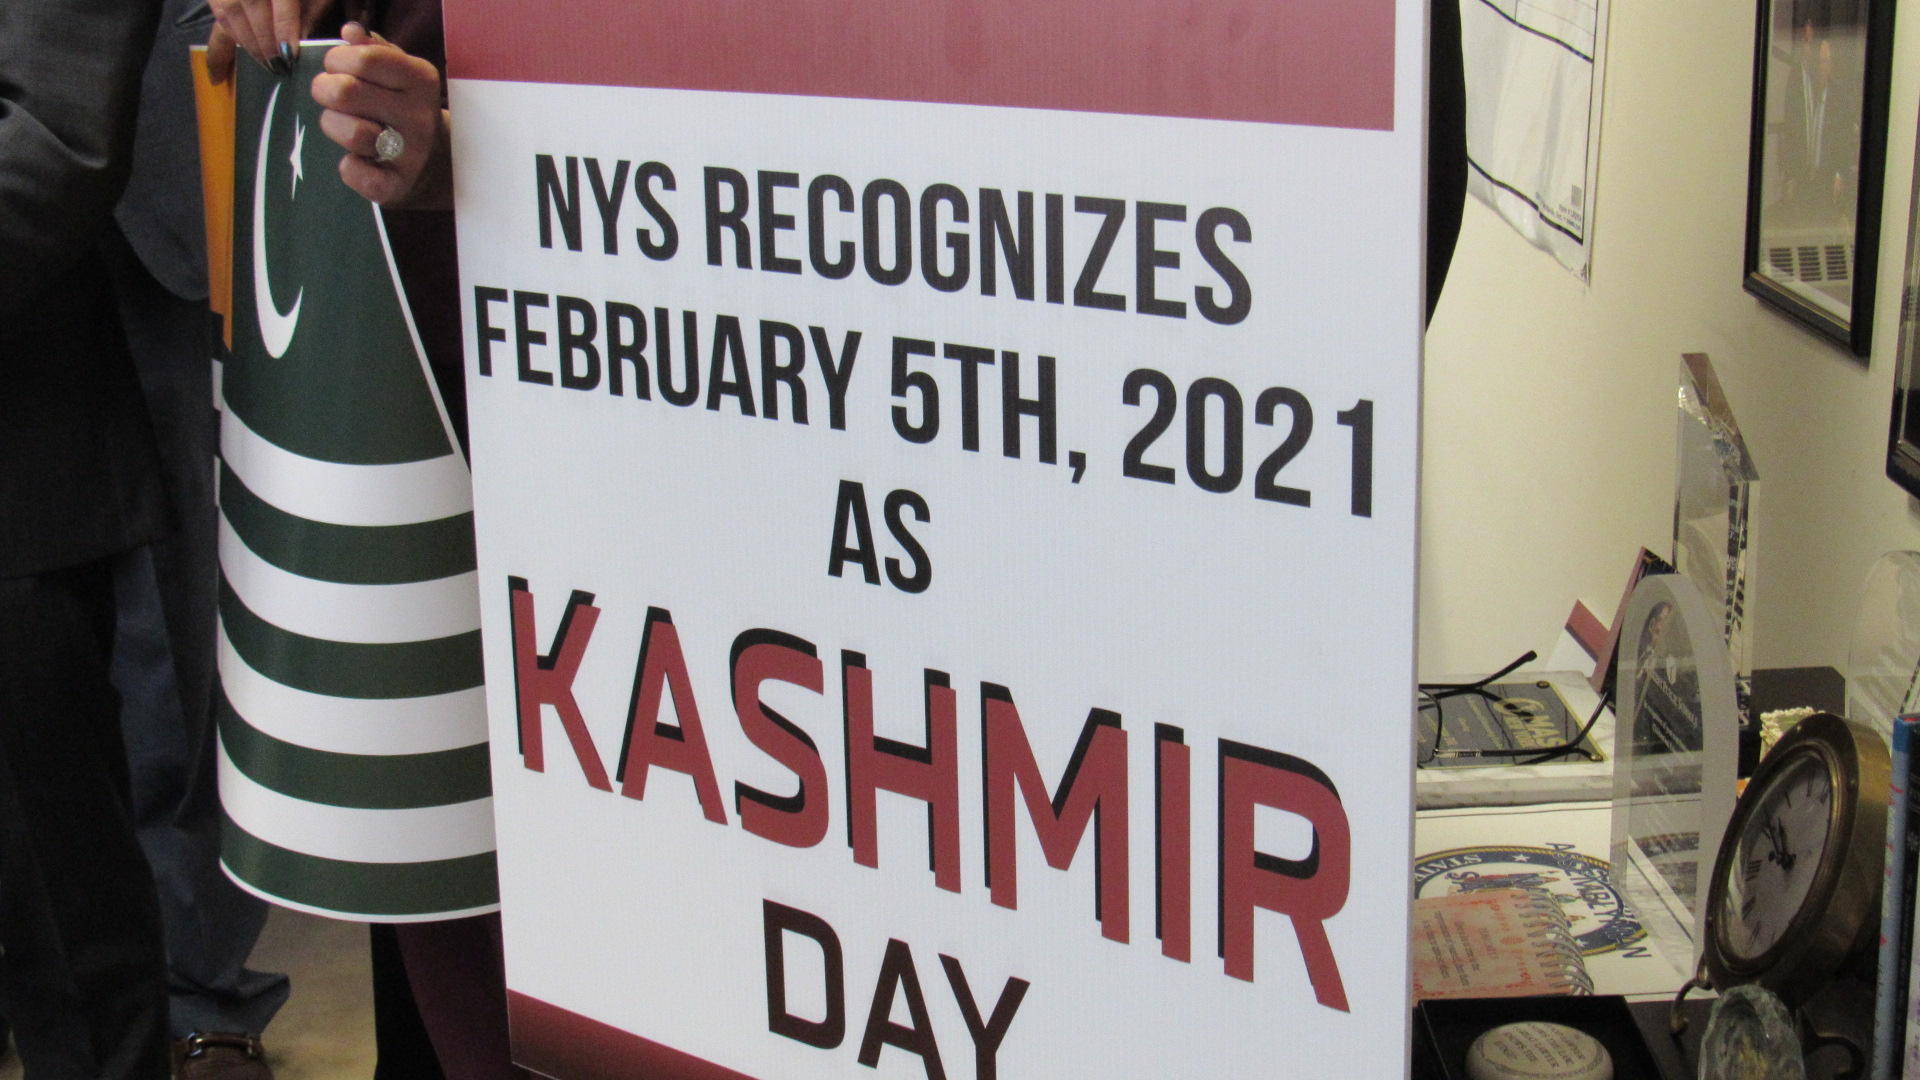 American Pakistani Advocacy Group members bring signs to Assemblyman Sayegh’s office in Yonkers.